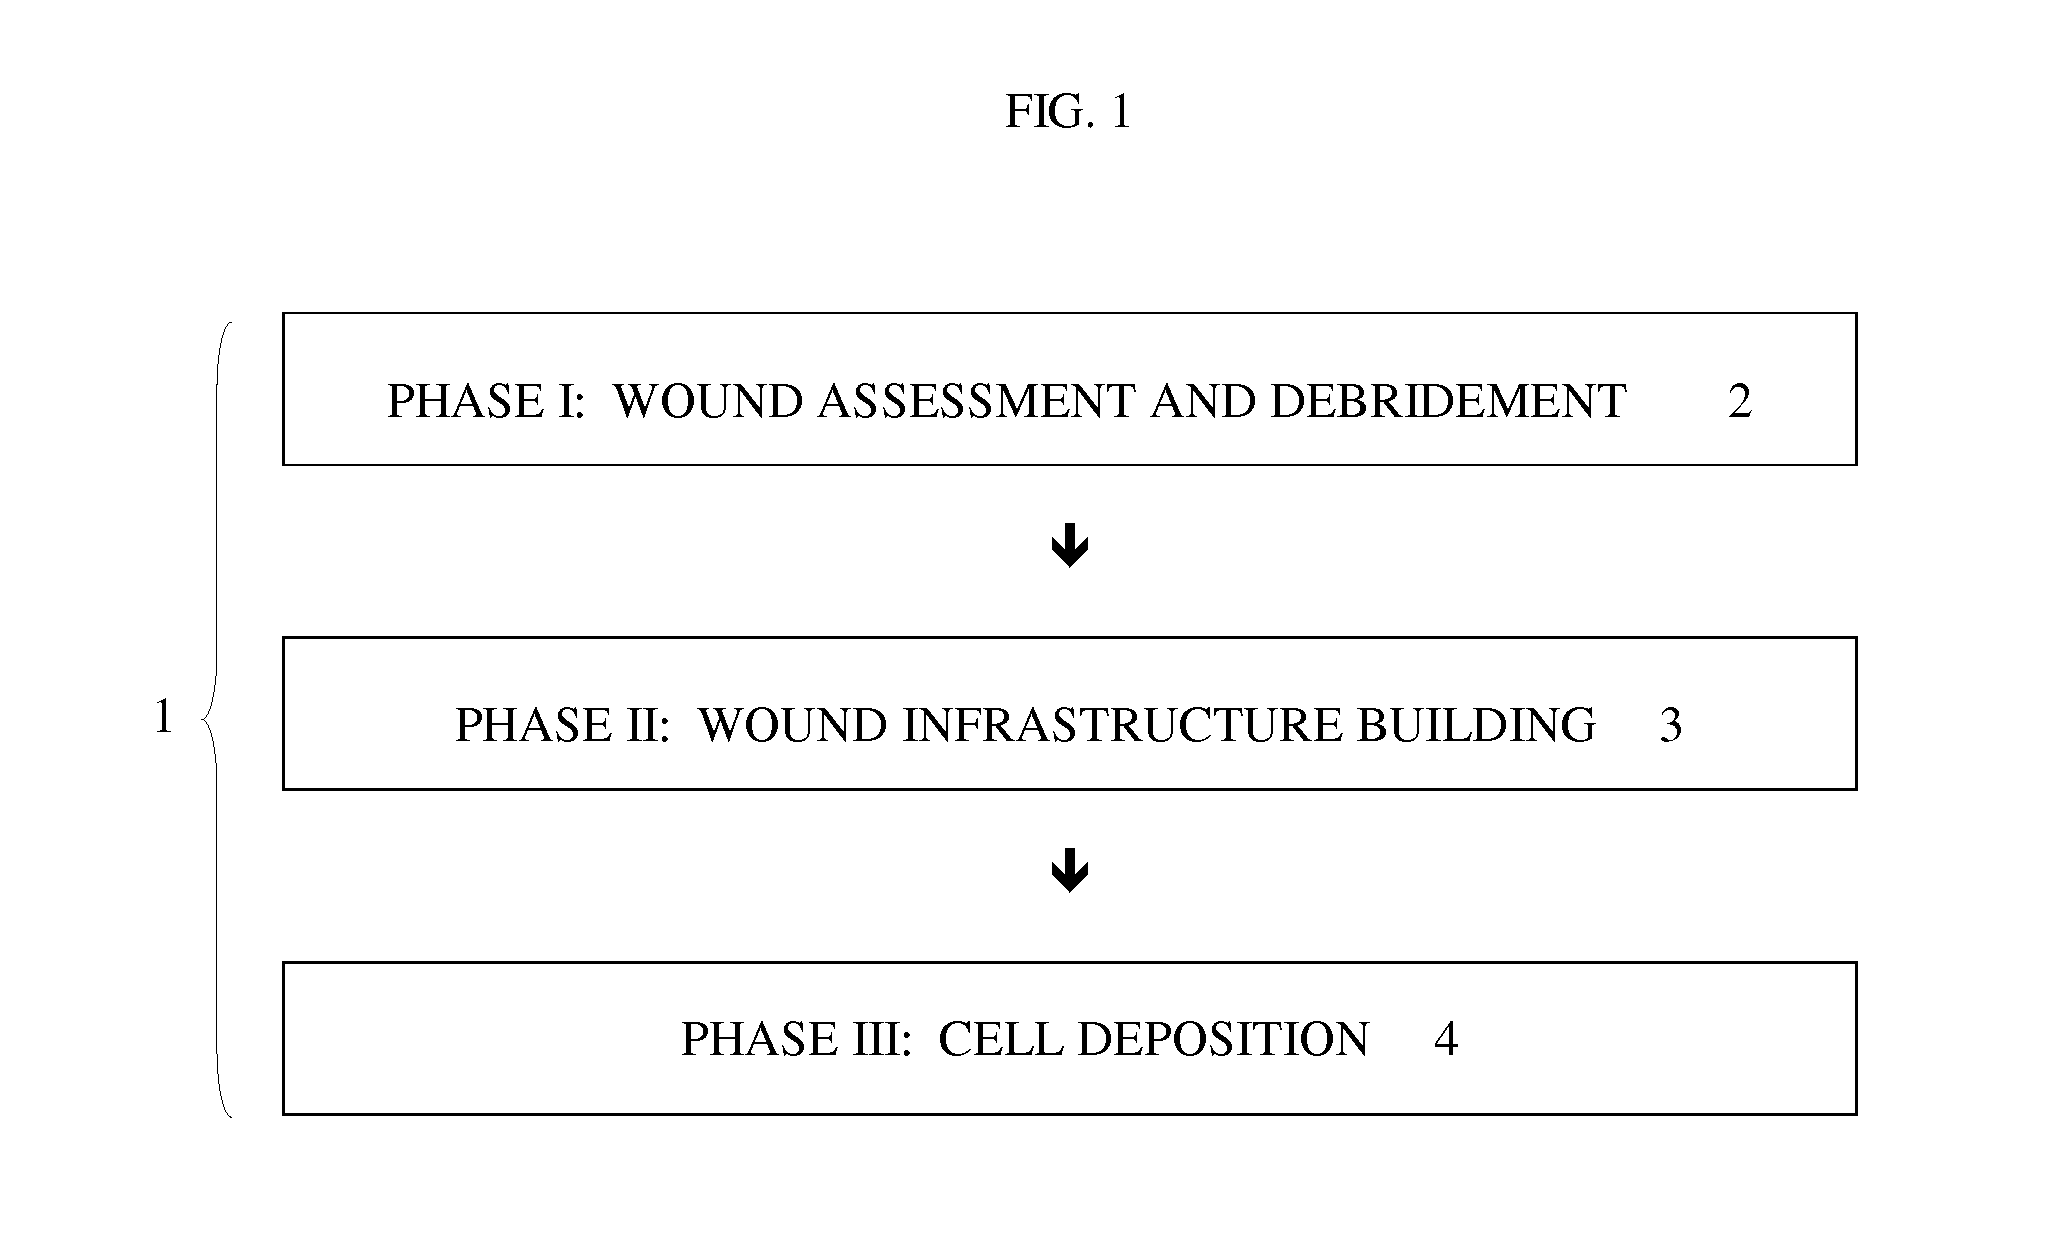 Multi-component method for regenerative repair of wounds implementing photonic wound debridement and stem cell deposition